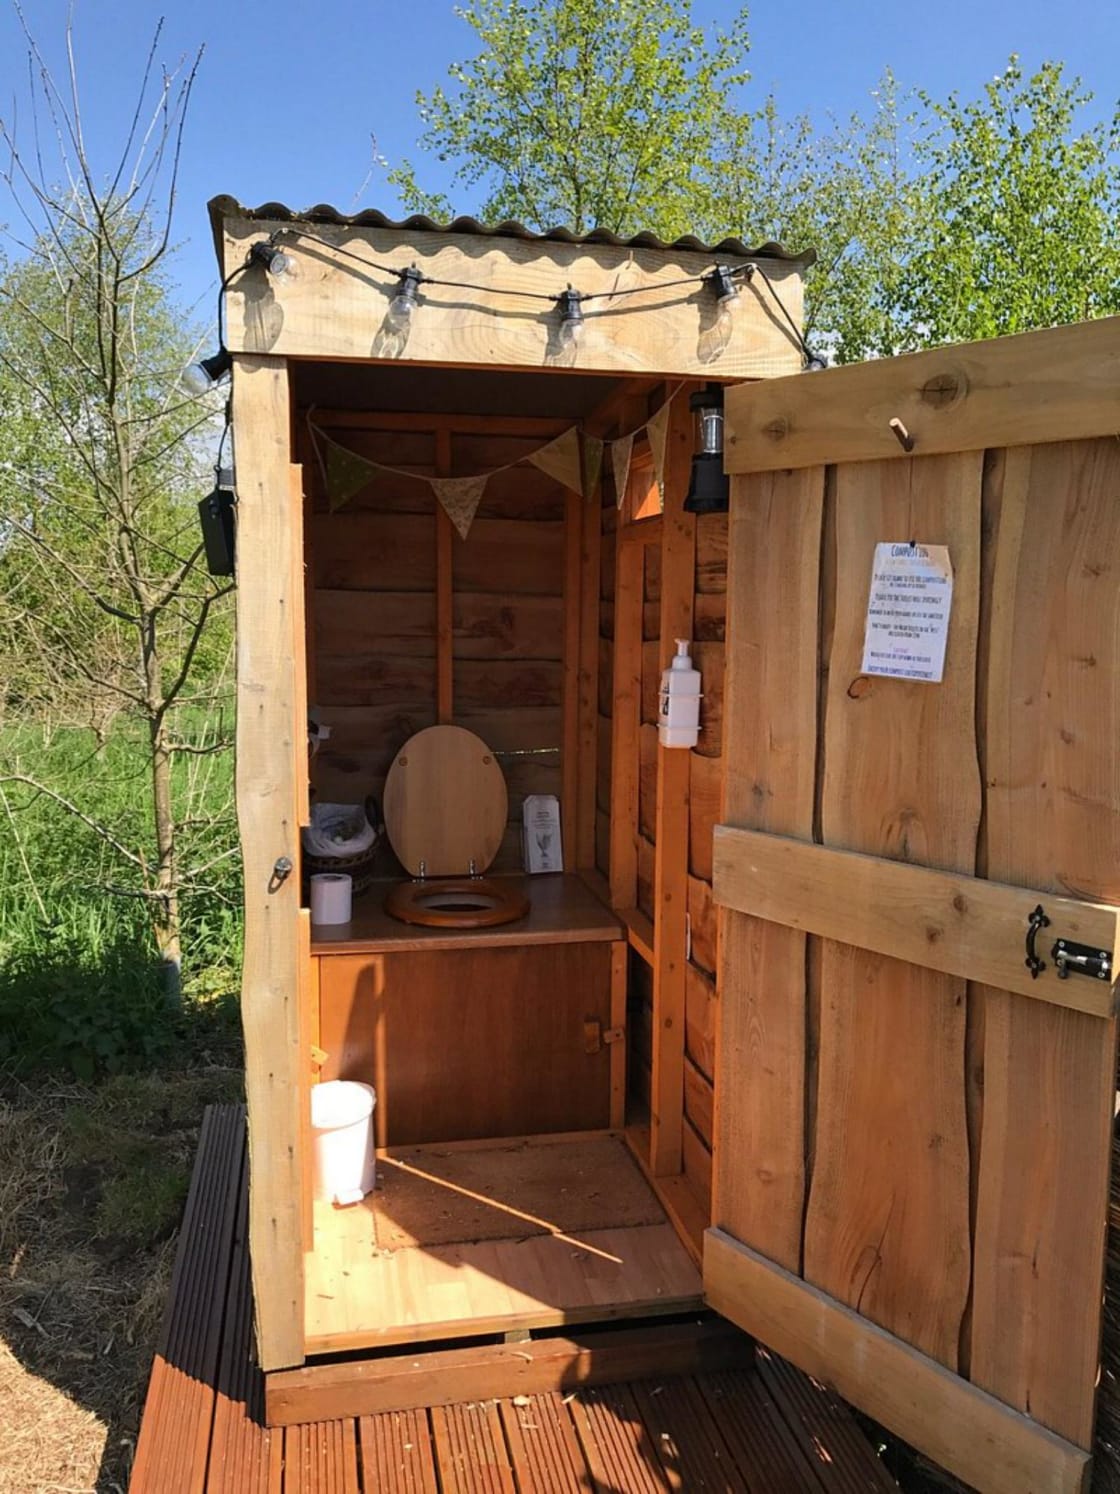 Grange Wood Glamping
Quirky Hut composting toilet